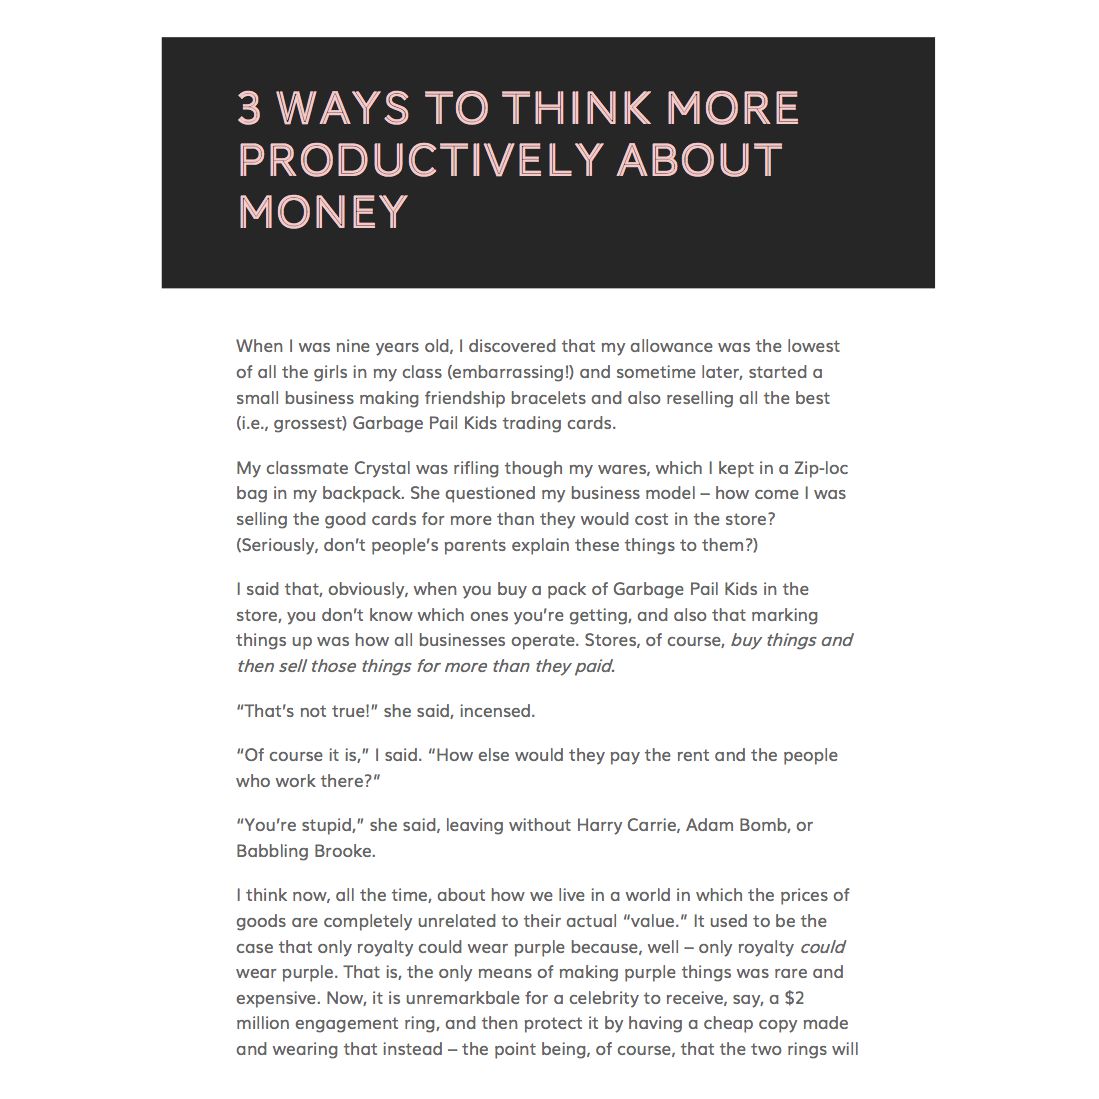 The GetBullish Guide to Thinking More Productively About Money